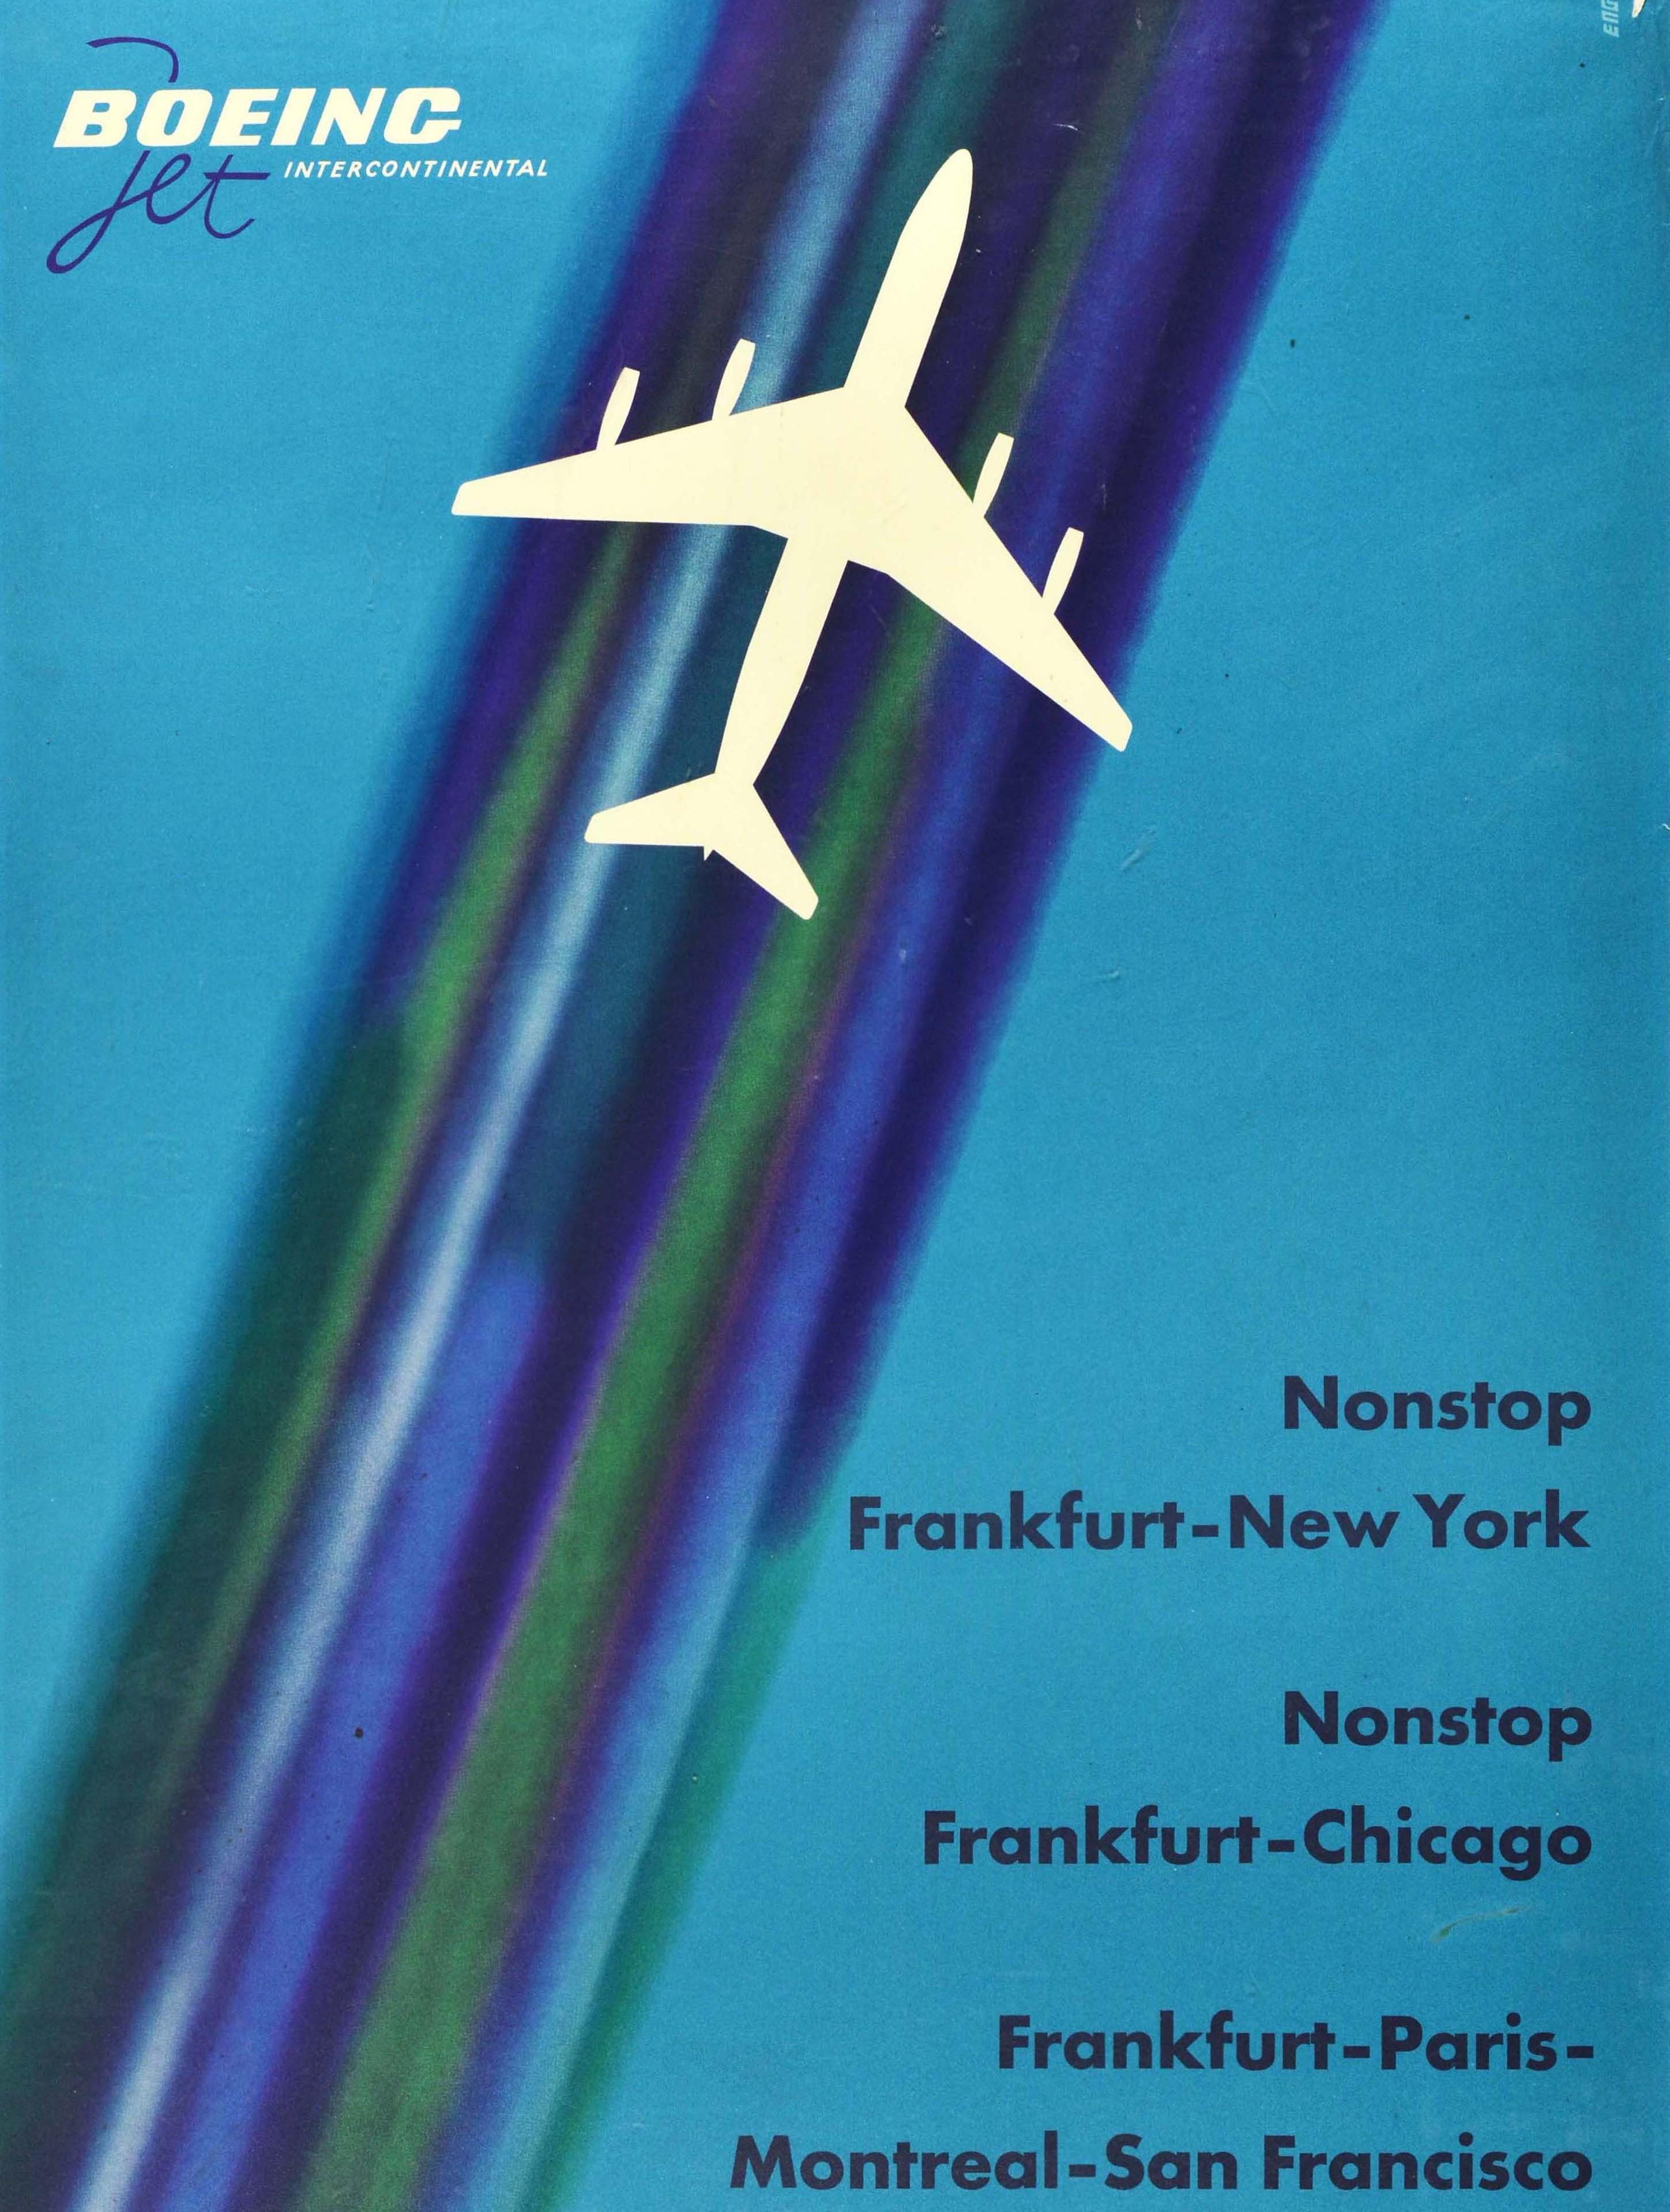 boeing poster